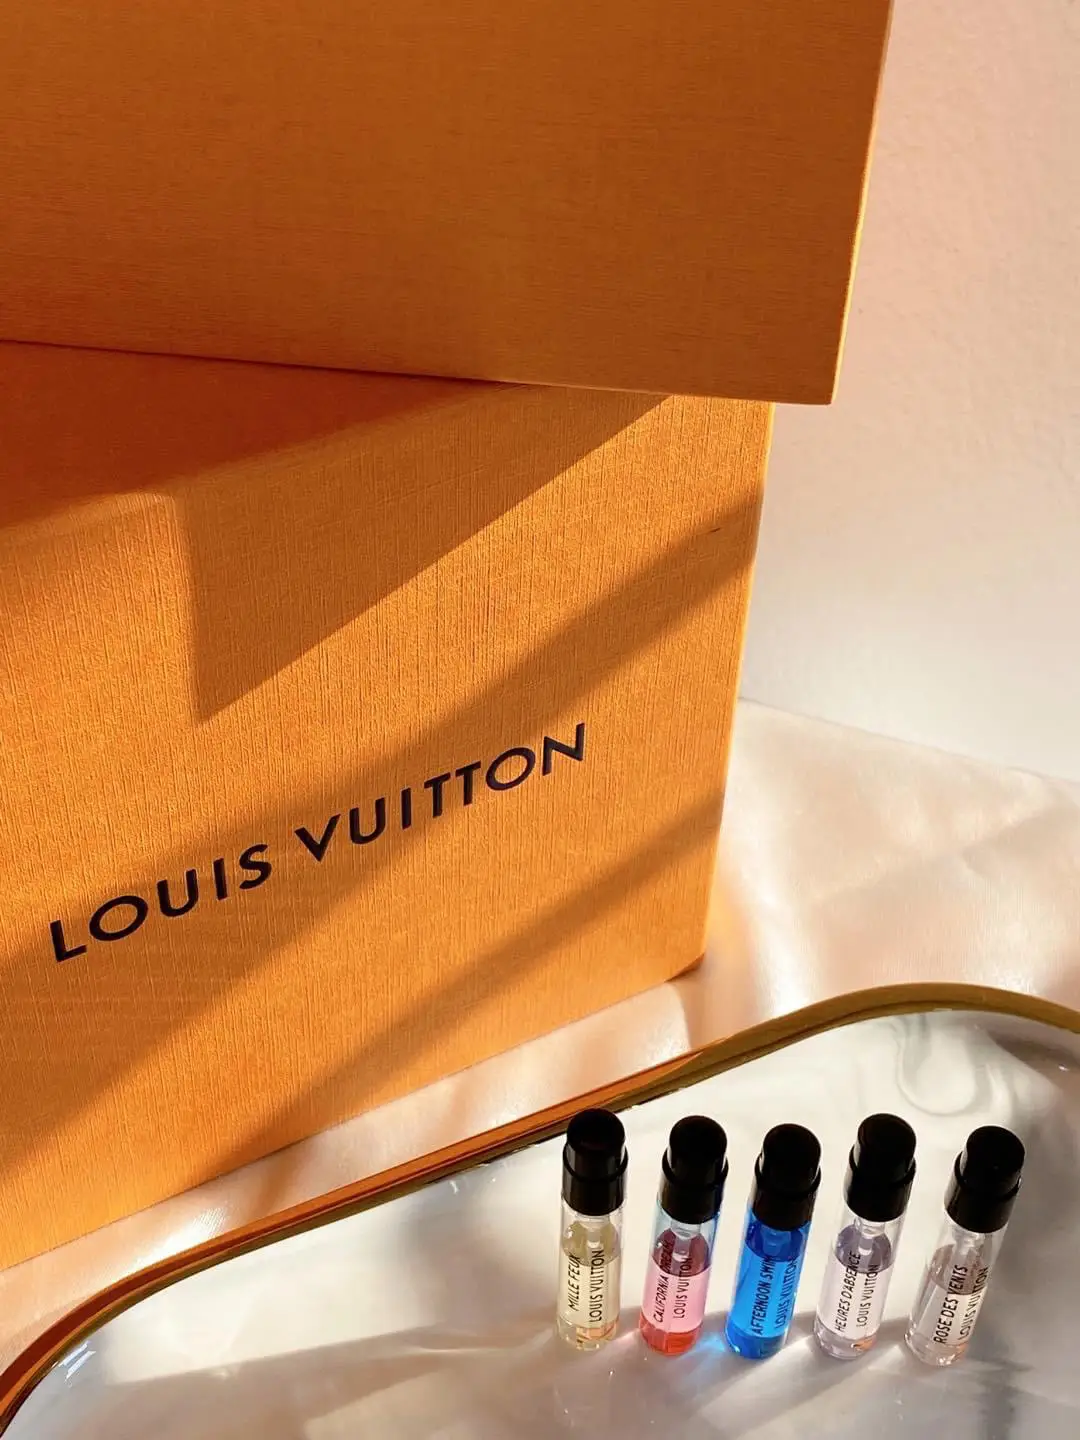 Why is Louis Vuitton afternoon swim worthy? -My Custom Scent